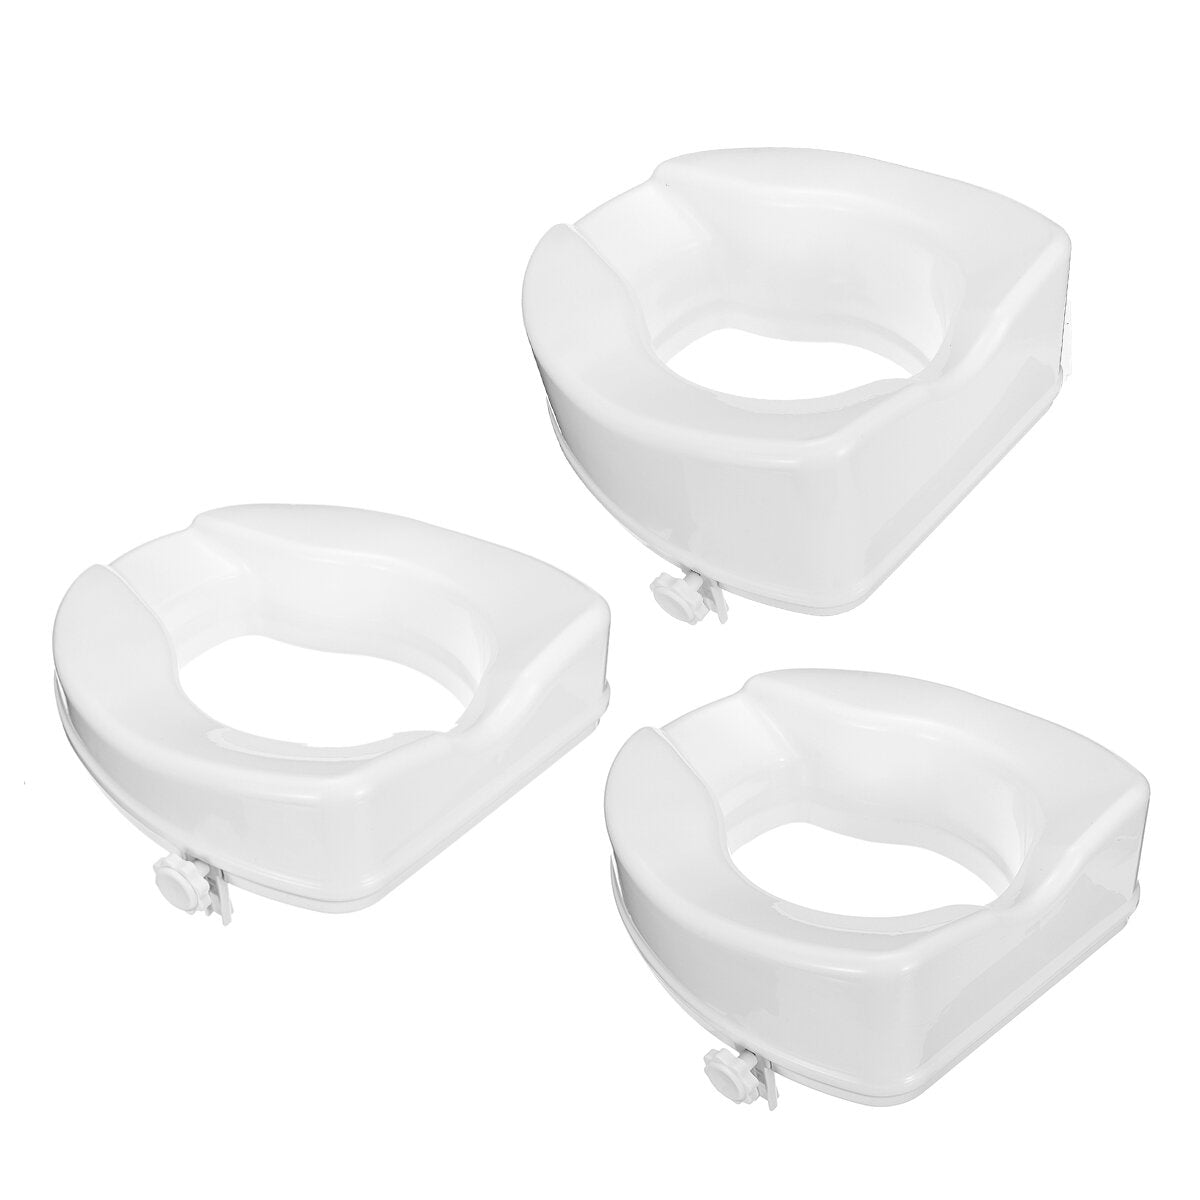 Elevated Raised Toilet Seat Lift Safety Without Cover